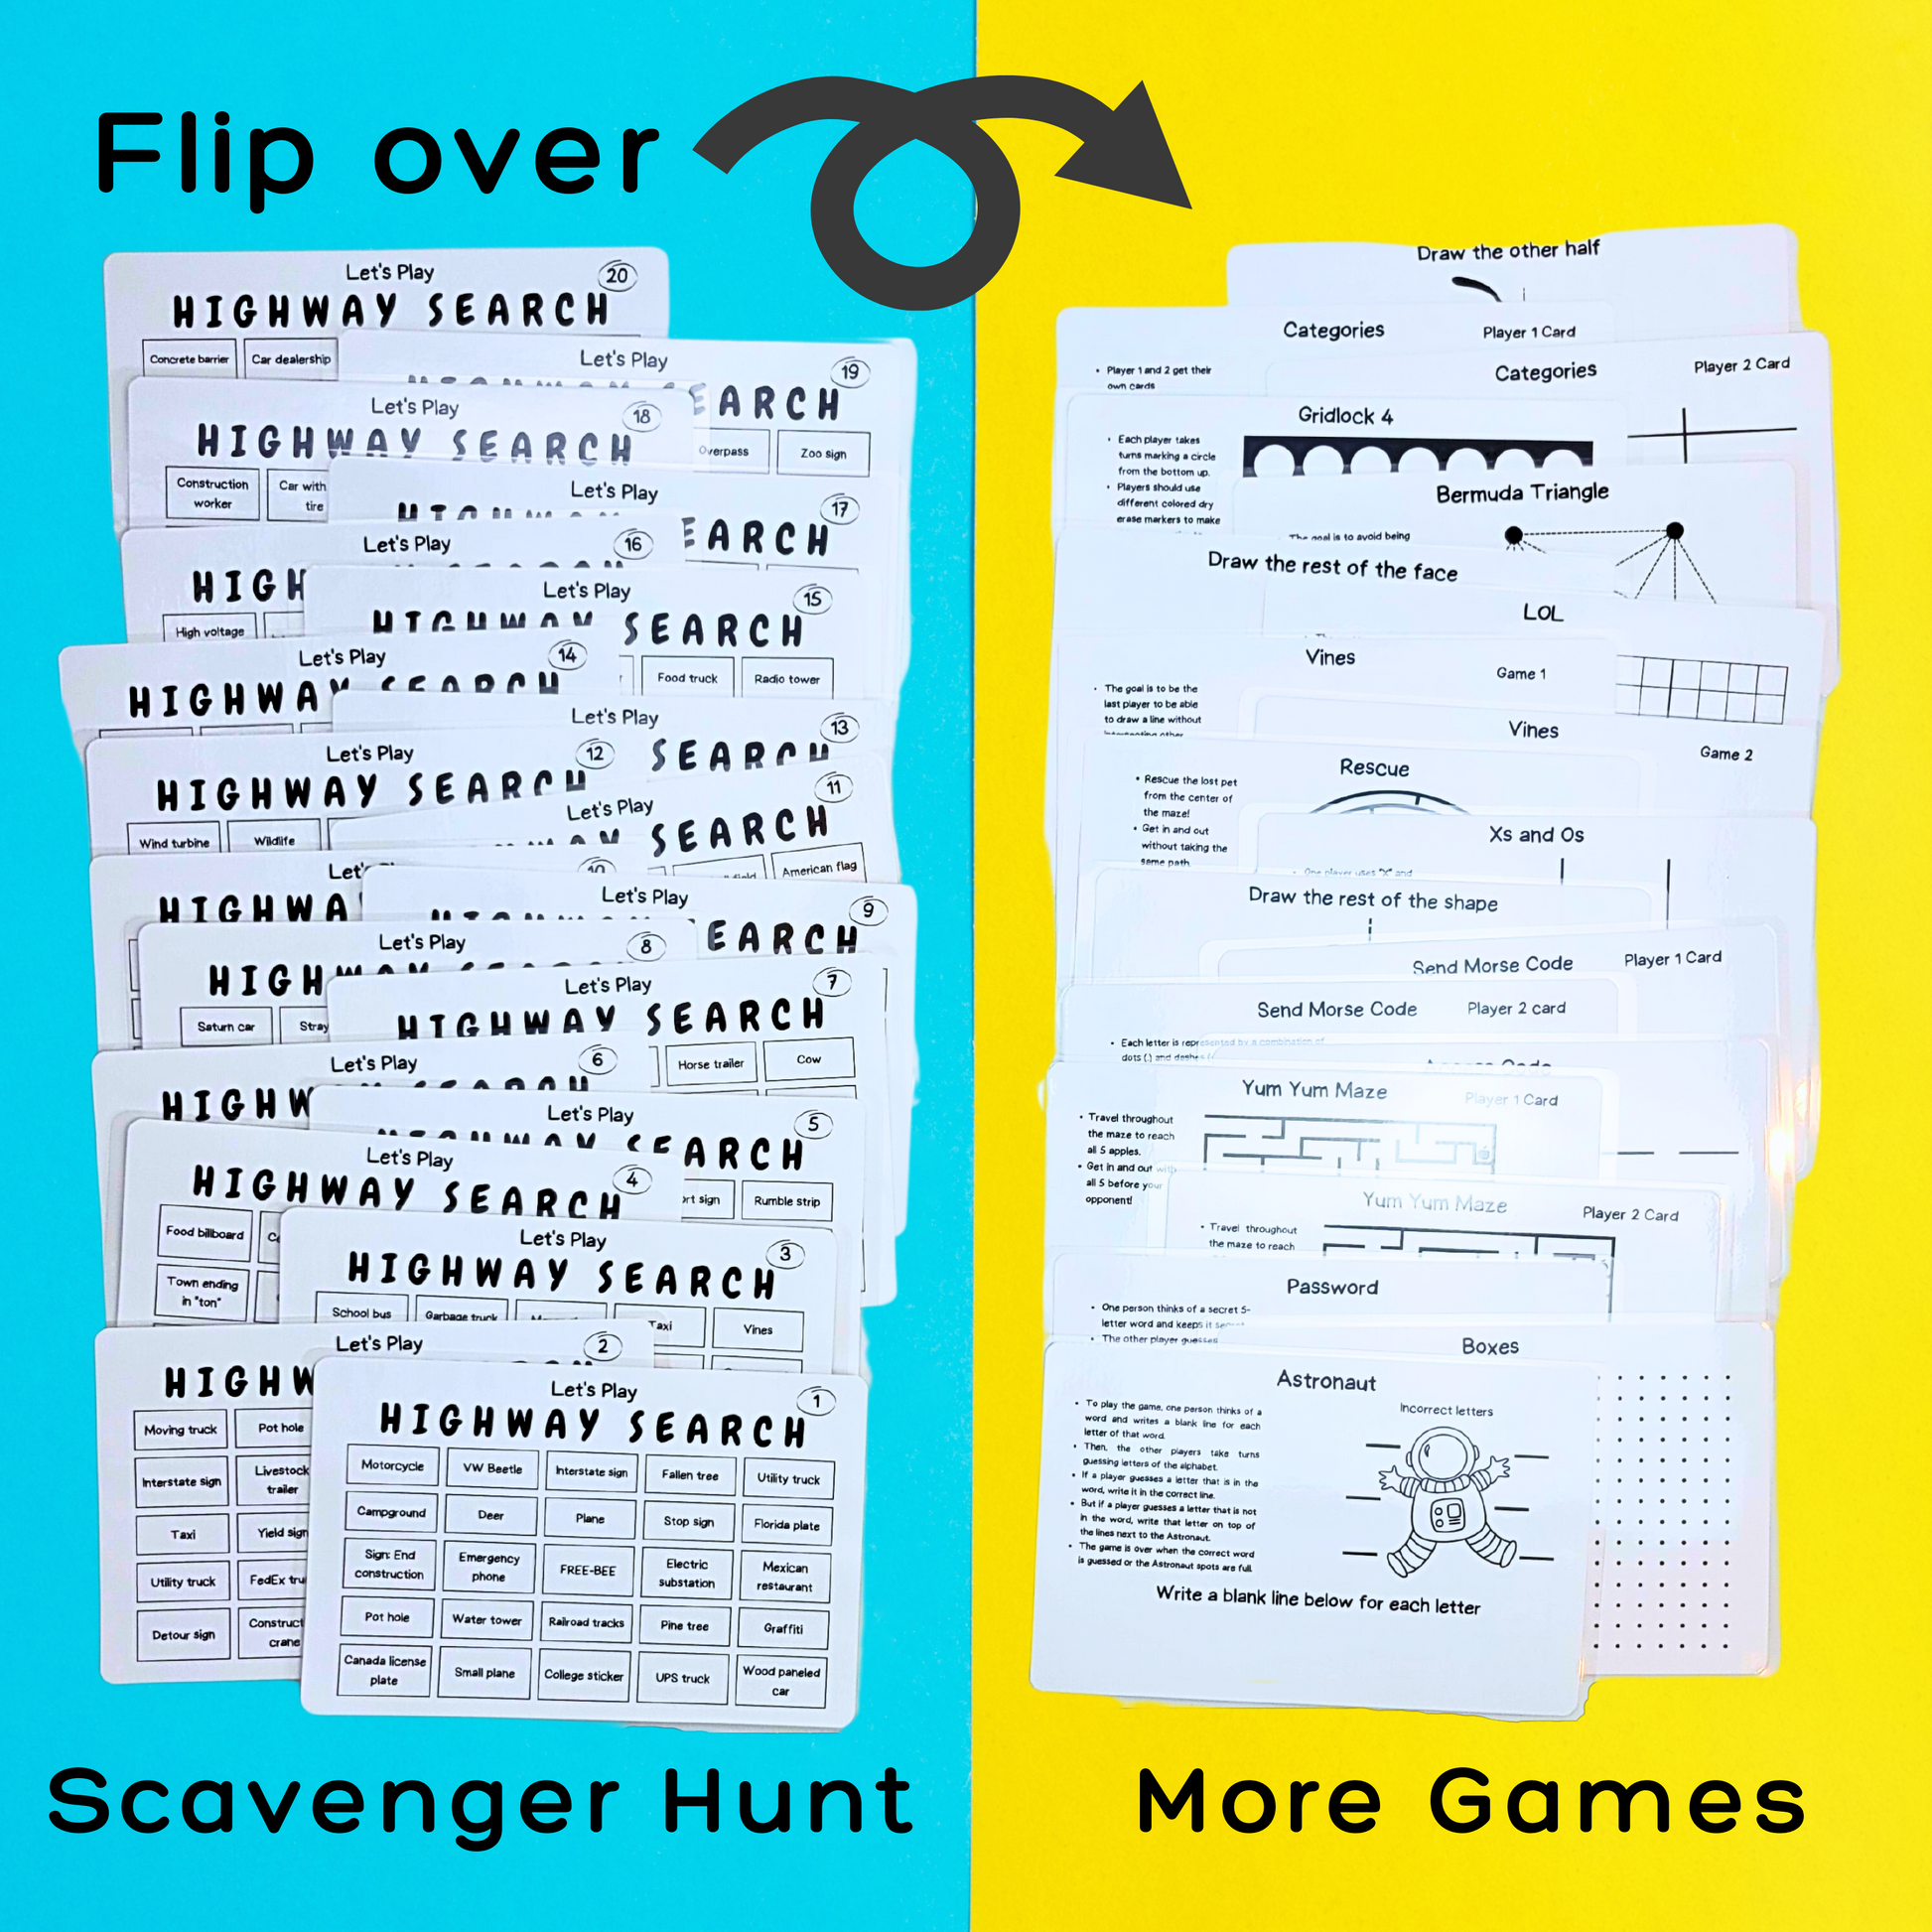 Highway Travel Games for Families: 36 Unique Games, Reusable Laminated Cards, Scavenger Hunt, Multiplayer Game